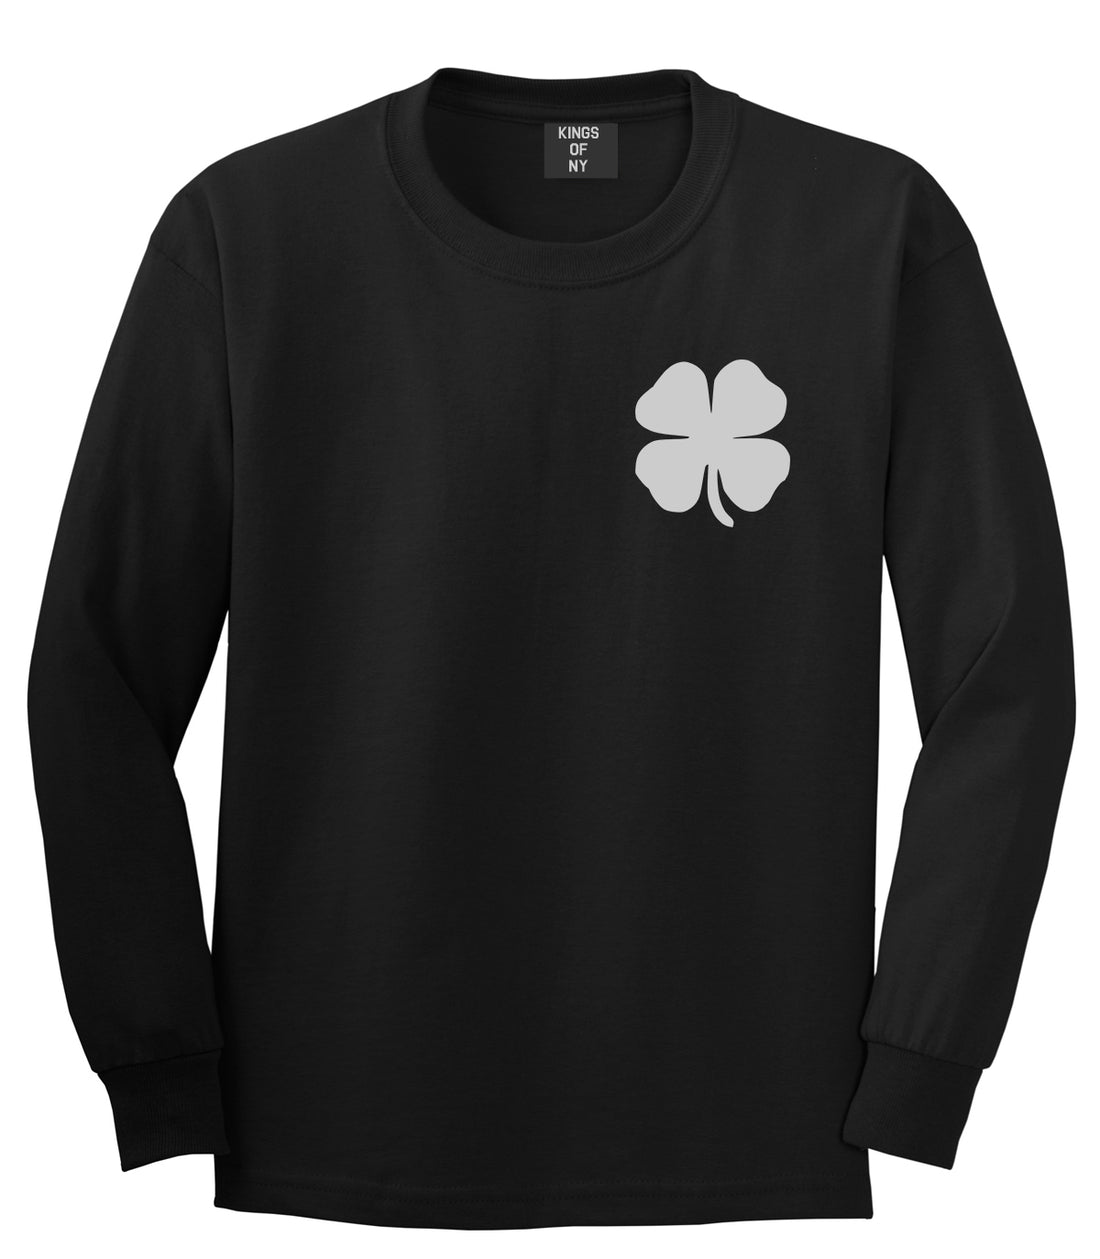 Four Leaf Clover Chest Black Long Sleeve T-Shirt by Kings Of NY